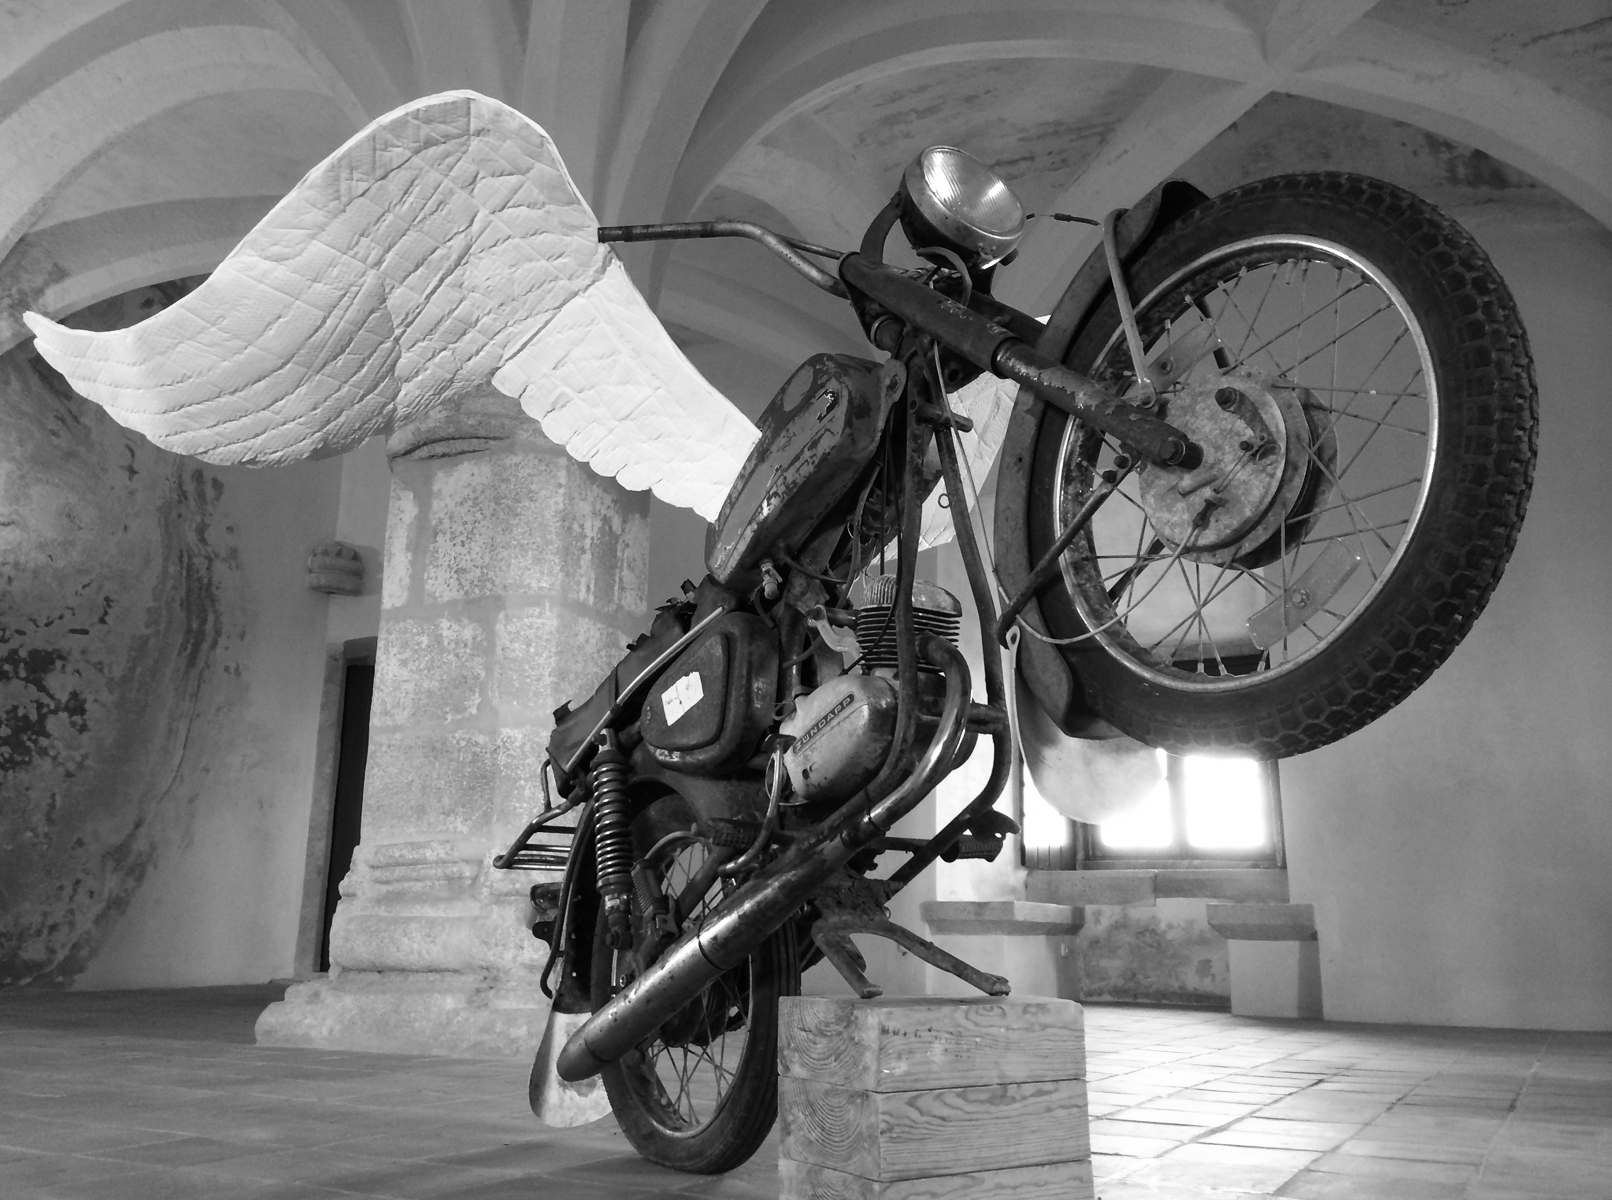 A rearing motorcycle with large white wings in a room with a vaulted ceiling.